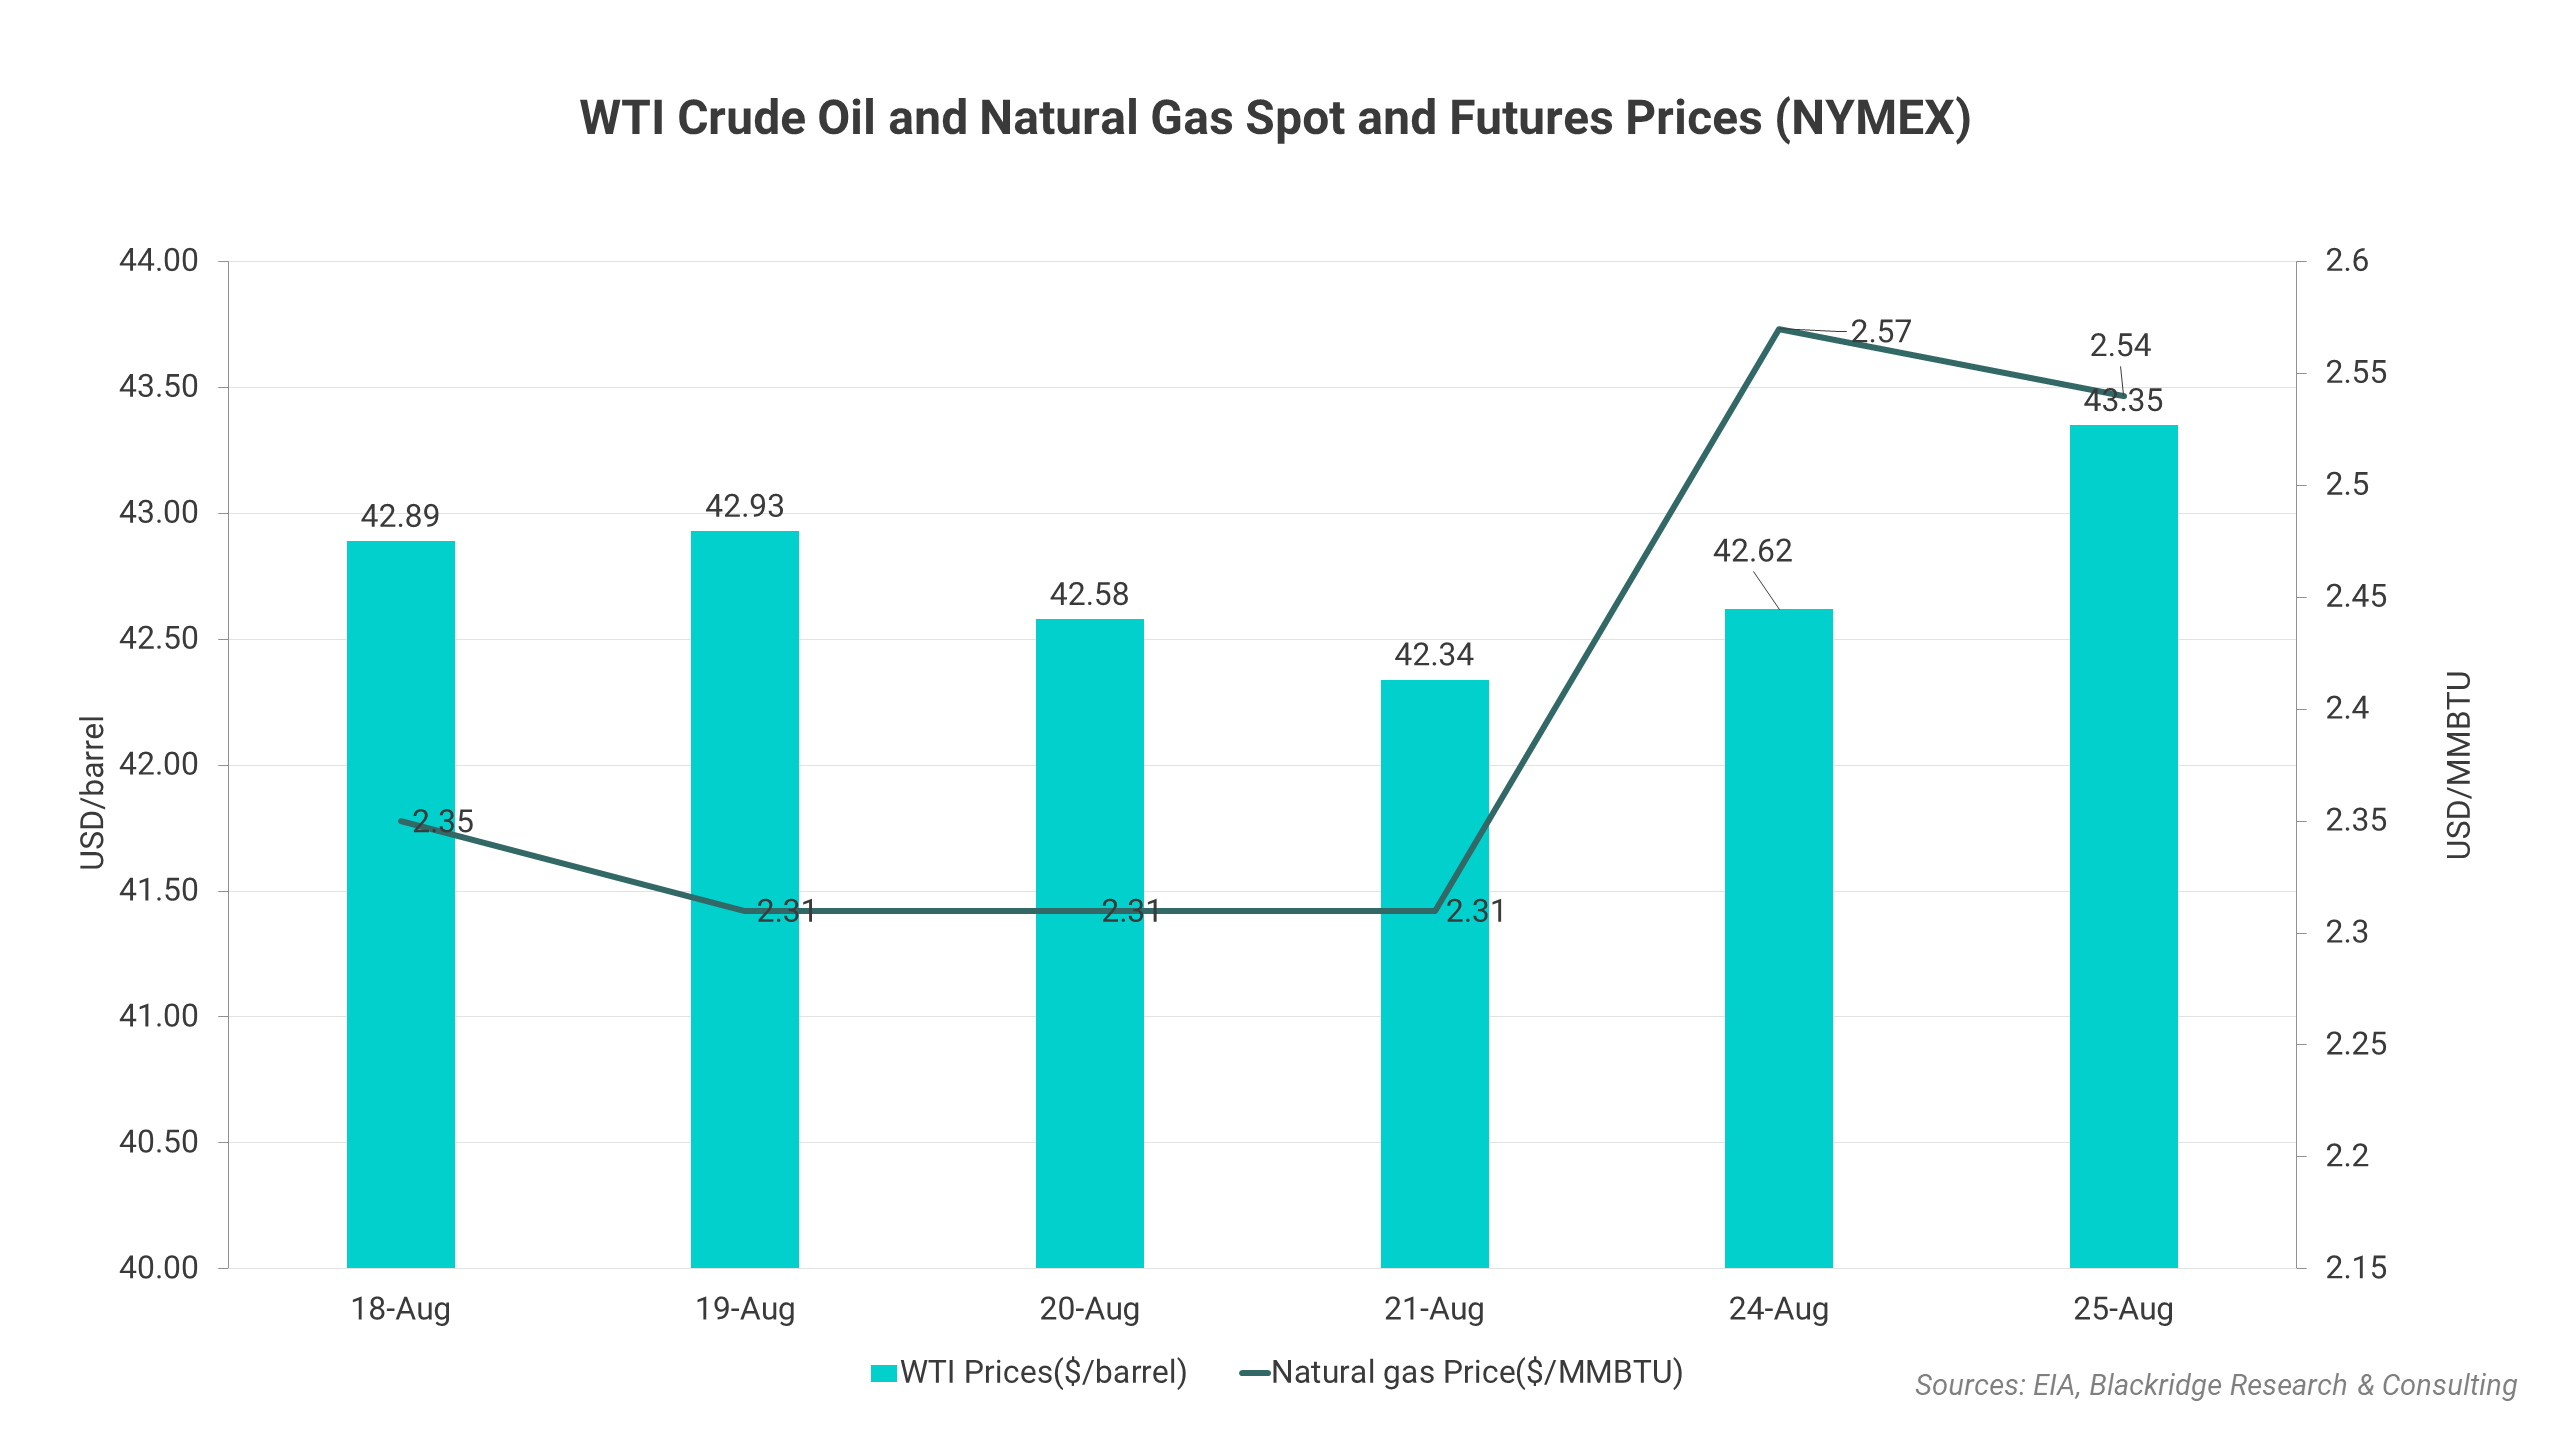 WTI Crude Oil and Natural Gas Spot and Futures Prices (NYMEX)